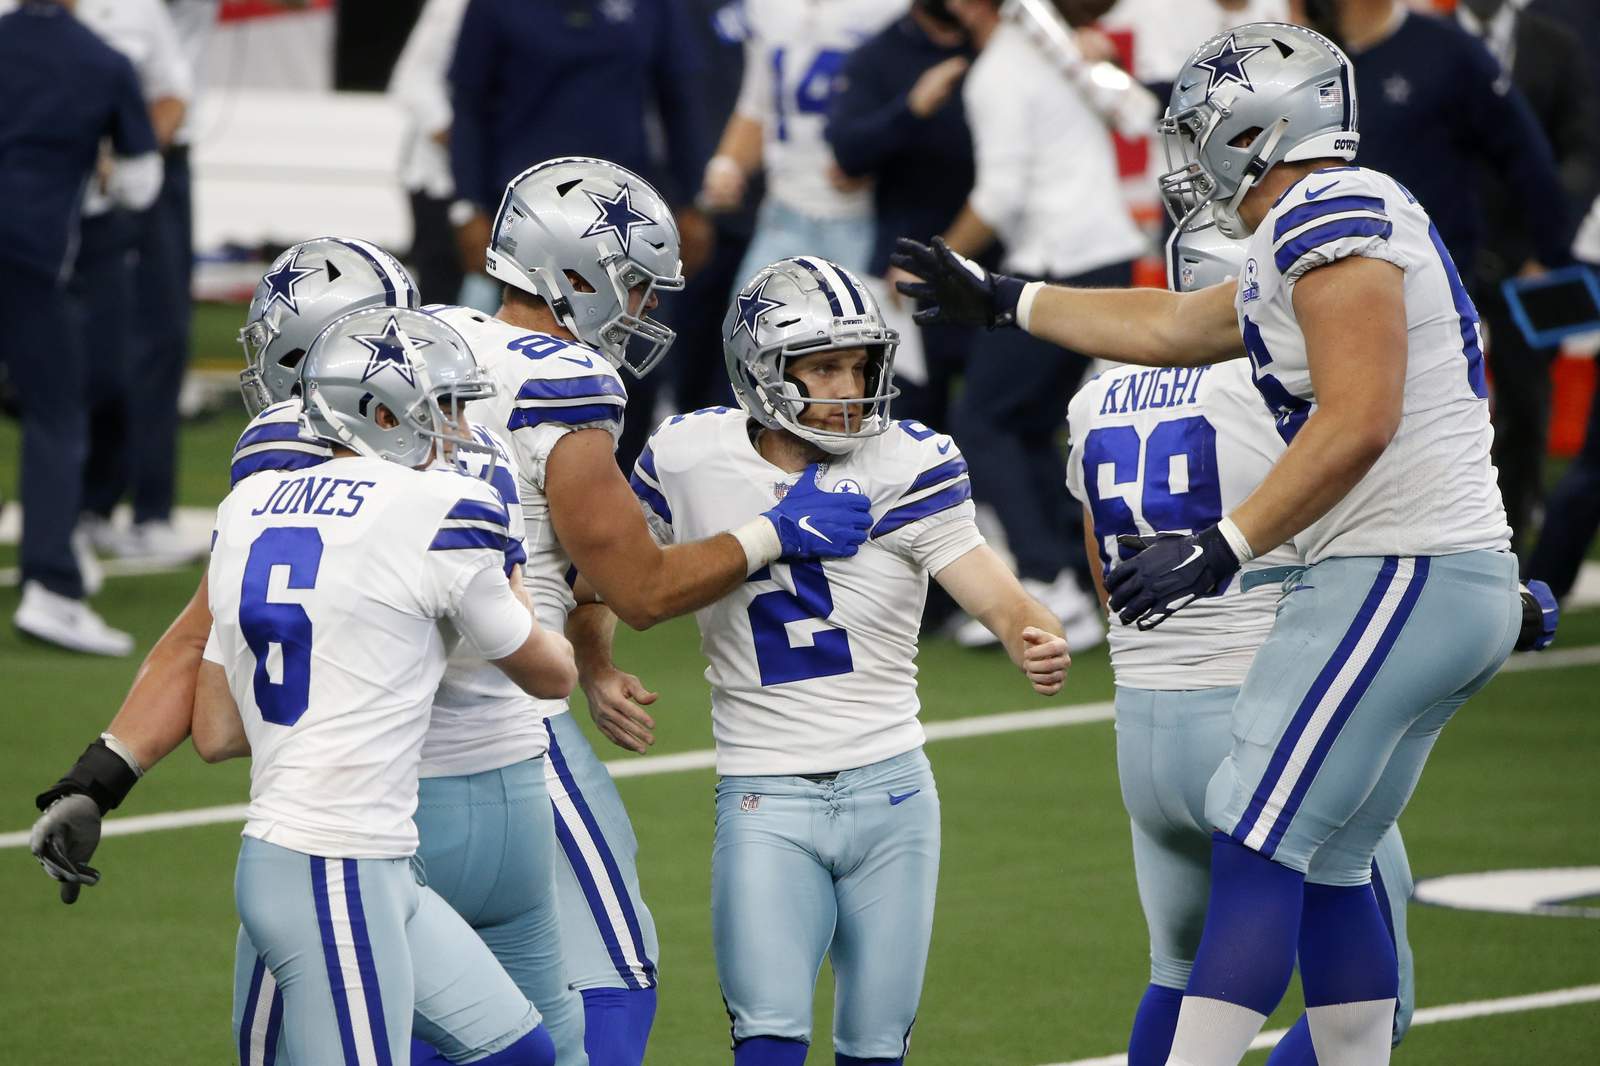 Cowboys' rally stuns Falcons 40-39 in McCarthy's home debut